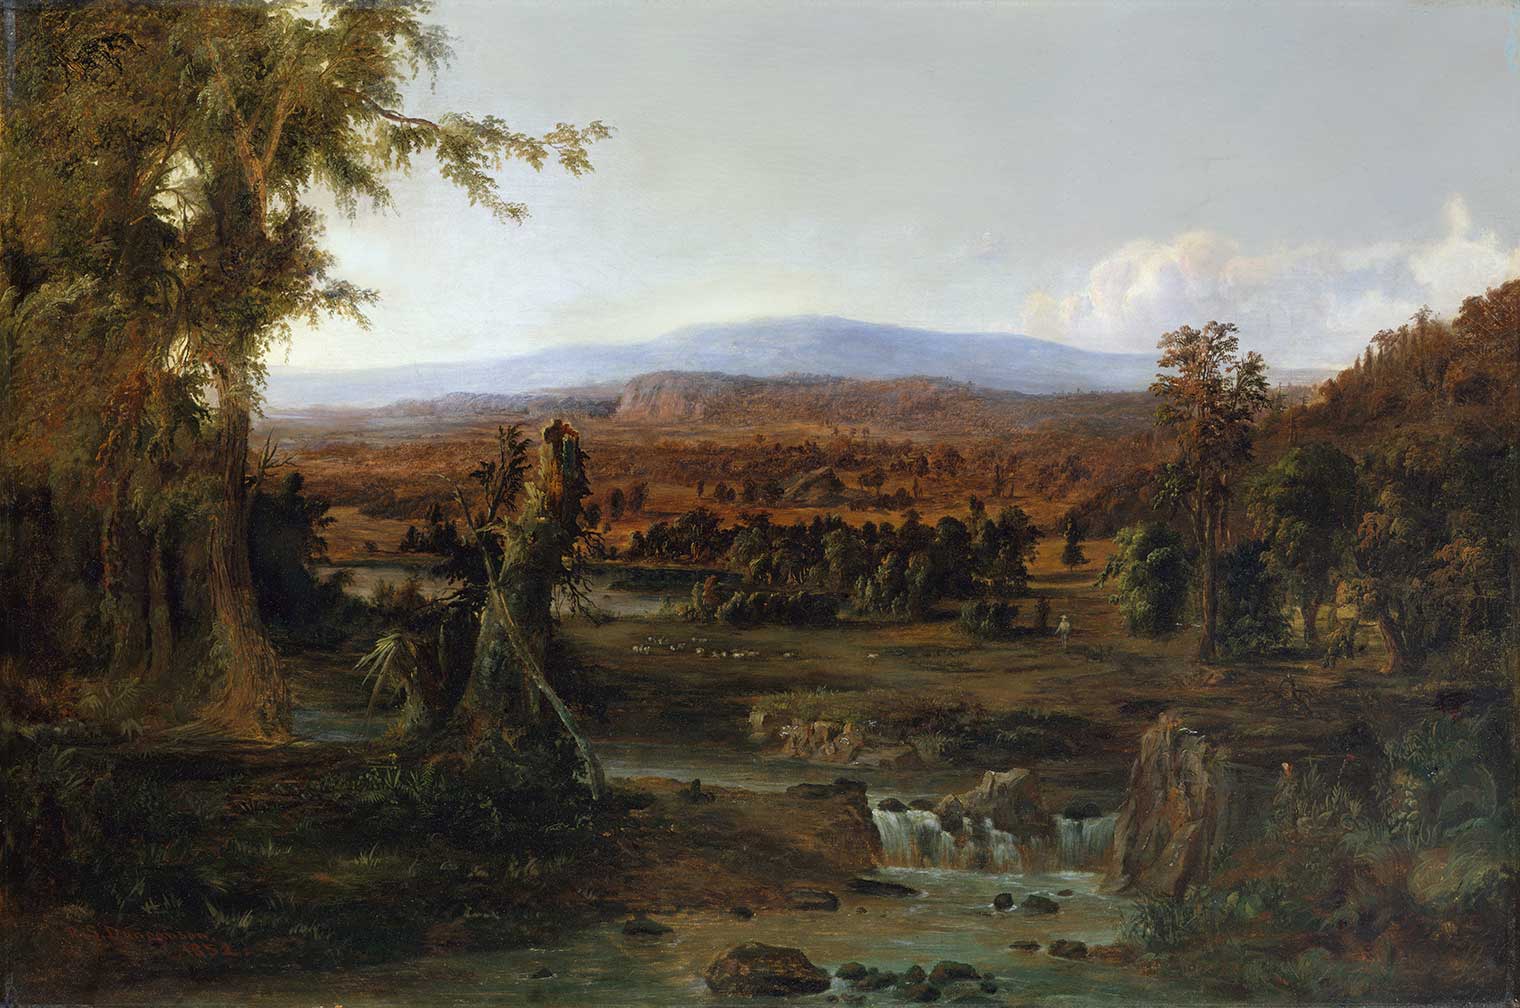 An oil painted landscaped depicts green trees in the foreground surrounding a babbling brook, while a small shepherd figure in the distance walks towards a yellowing pastoral clearing. A mountain can be seen in the far distance.